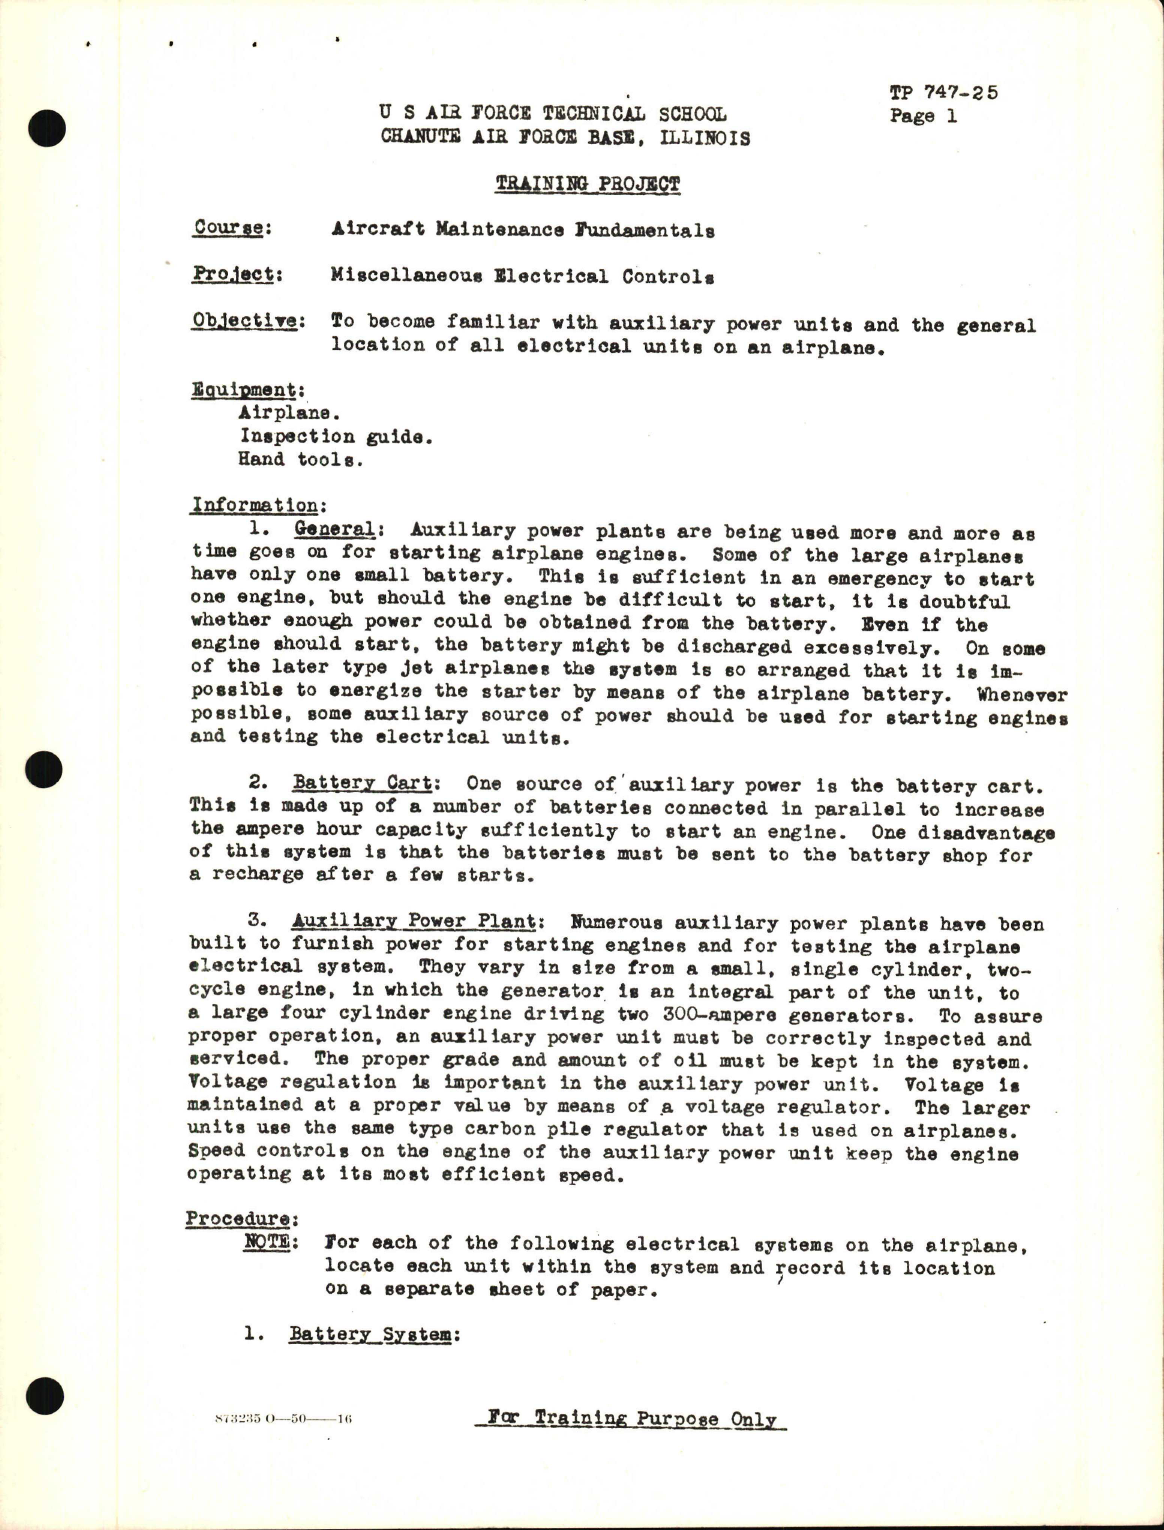 Sample page 1 from AirCorps Library document: Training Project, Miscellaneous Electrical Controls